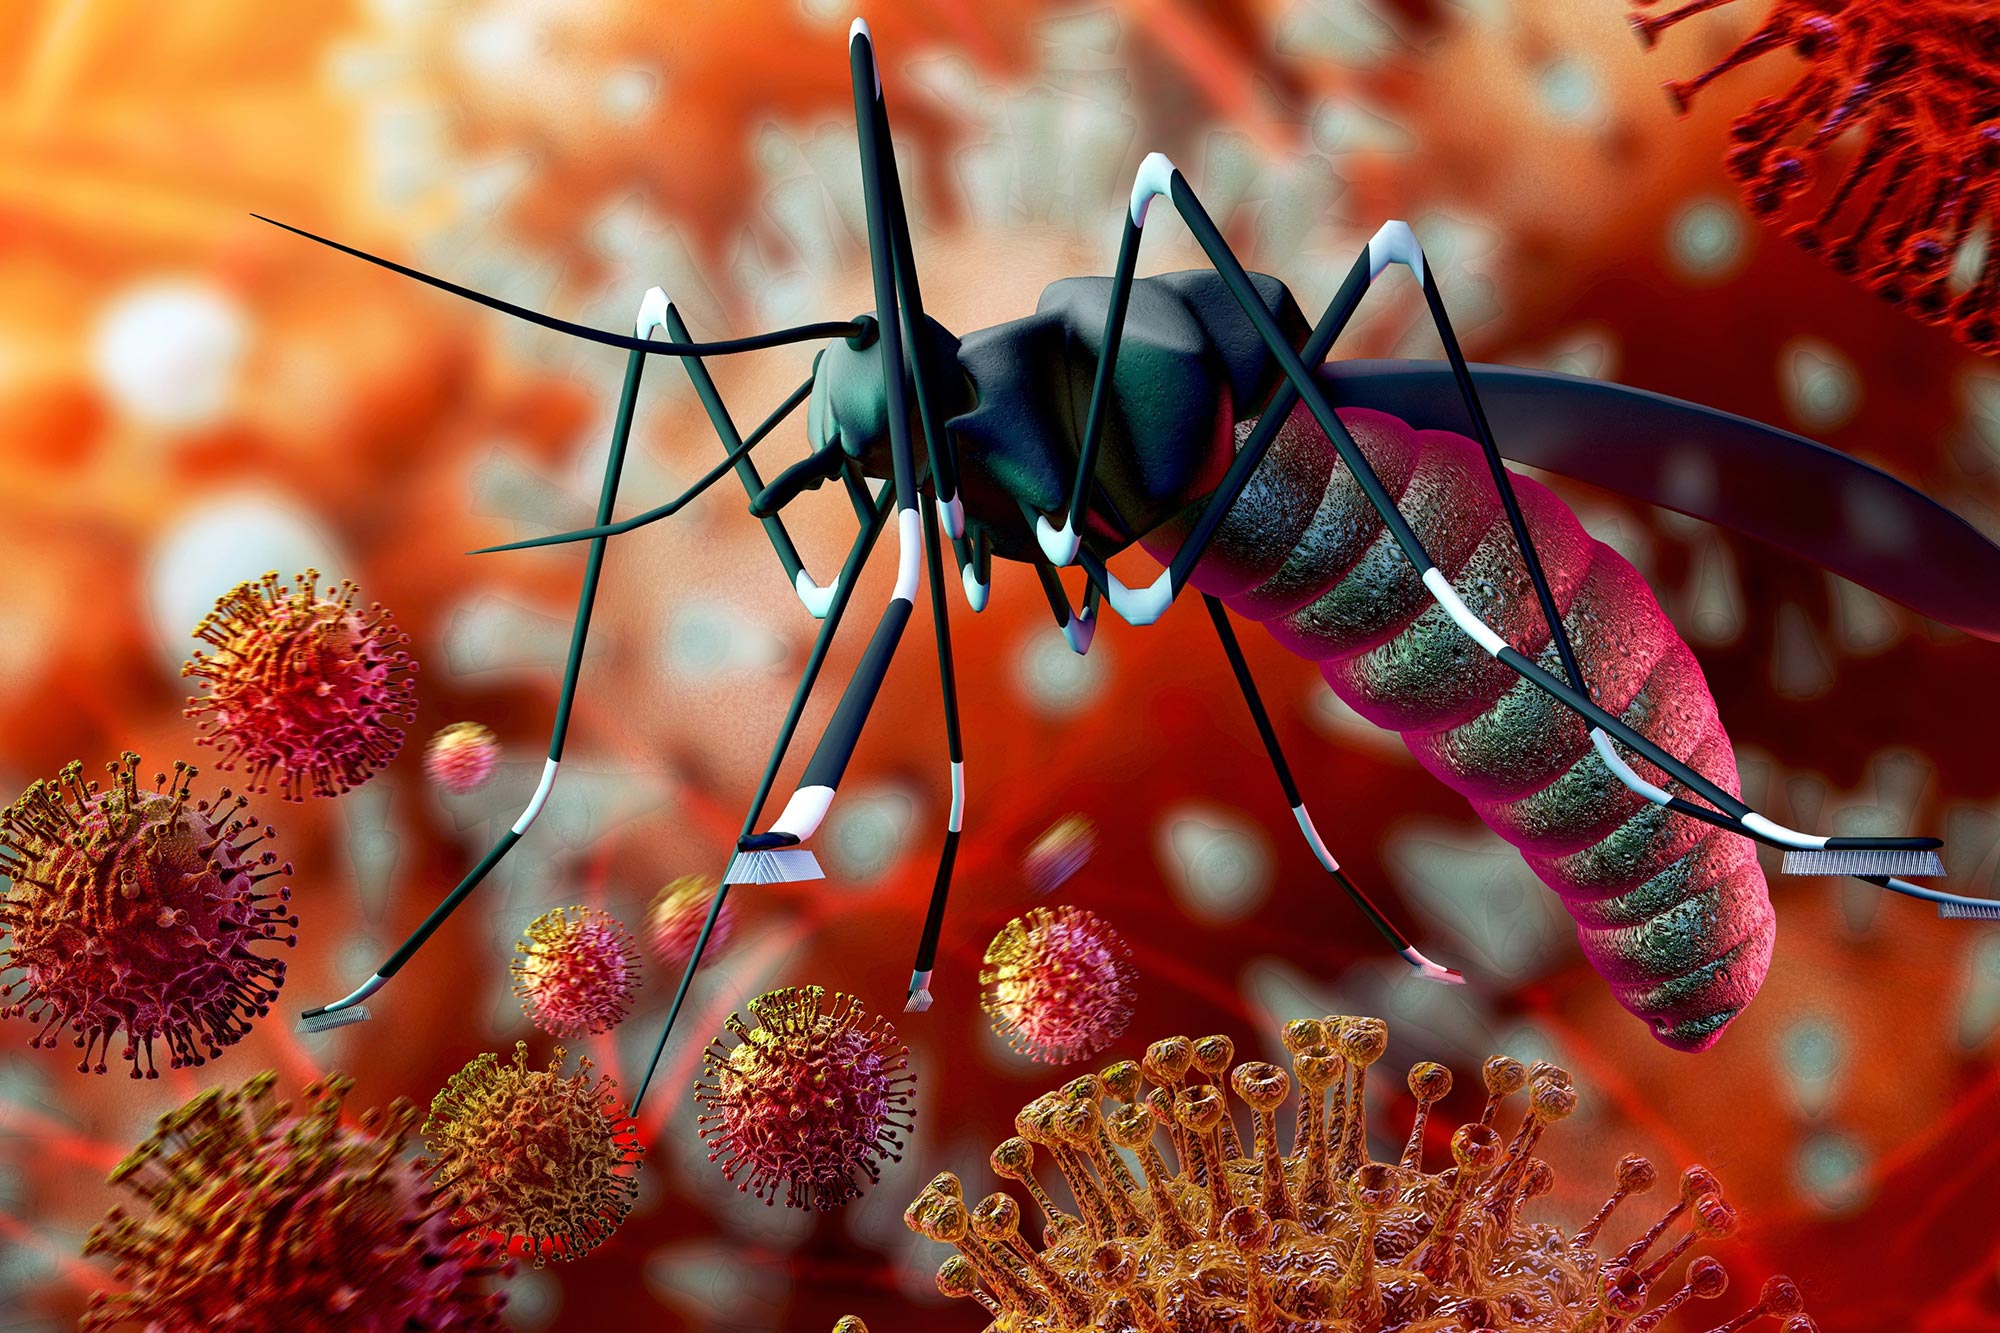 Researchers Develop New Approach in the Fight Against Drug Resistance in Malaria